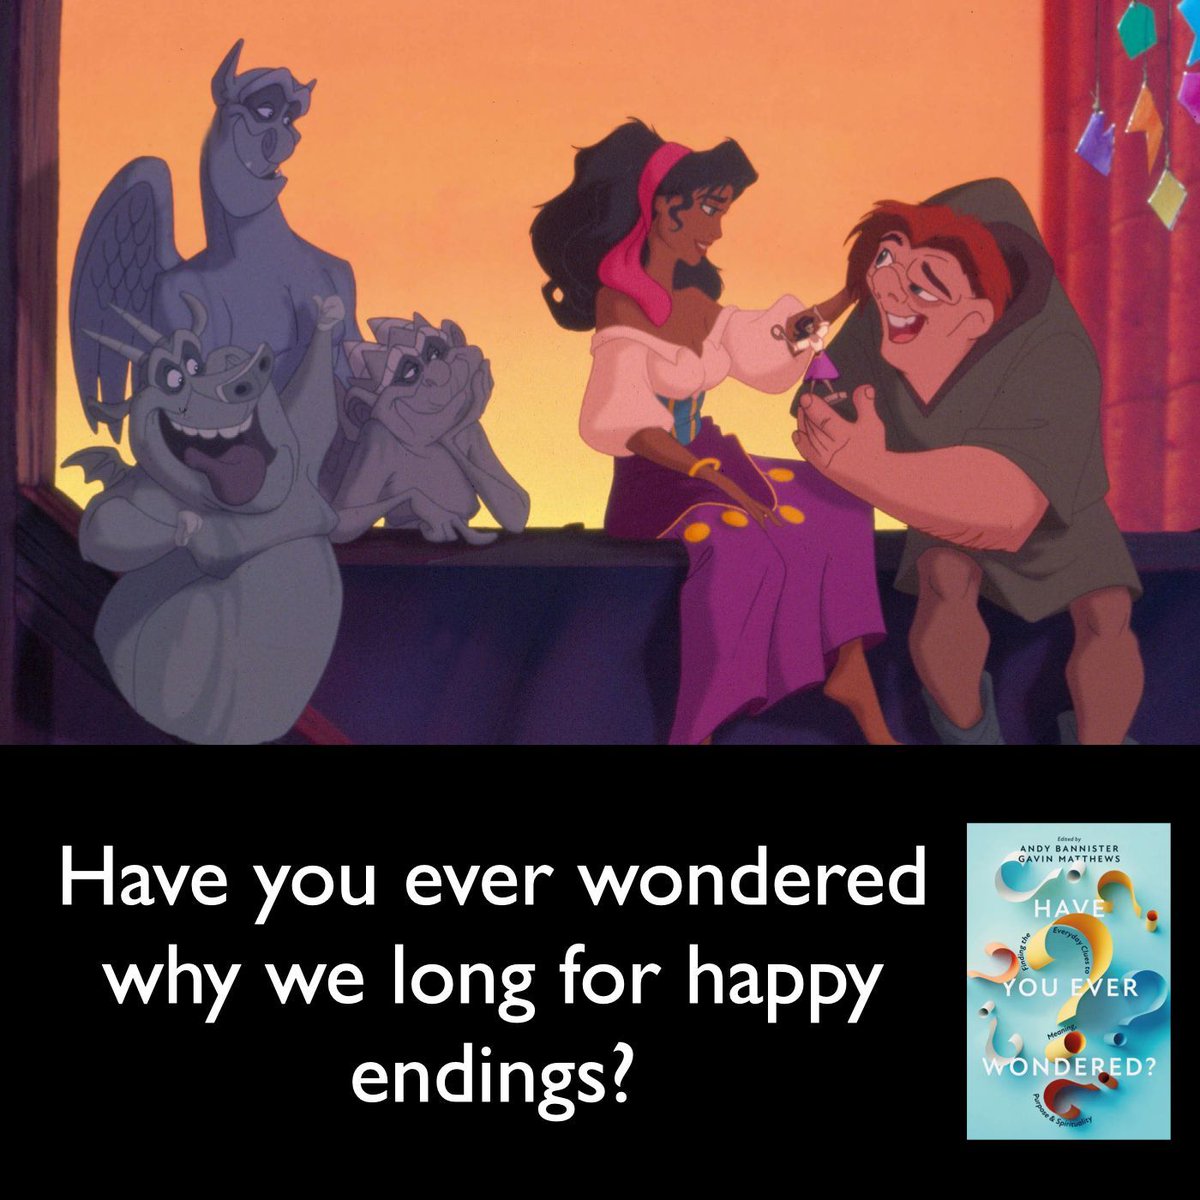 Have you ever wondered why we long for happy endings in our stories & movies? Life just isn't like that — is it? So why do we love our stories to look this way? That's one of many questions we explore in the new book 'Have You Ever Wondered?'. Find it at buff.ly/3UJqXJA.